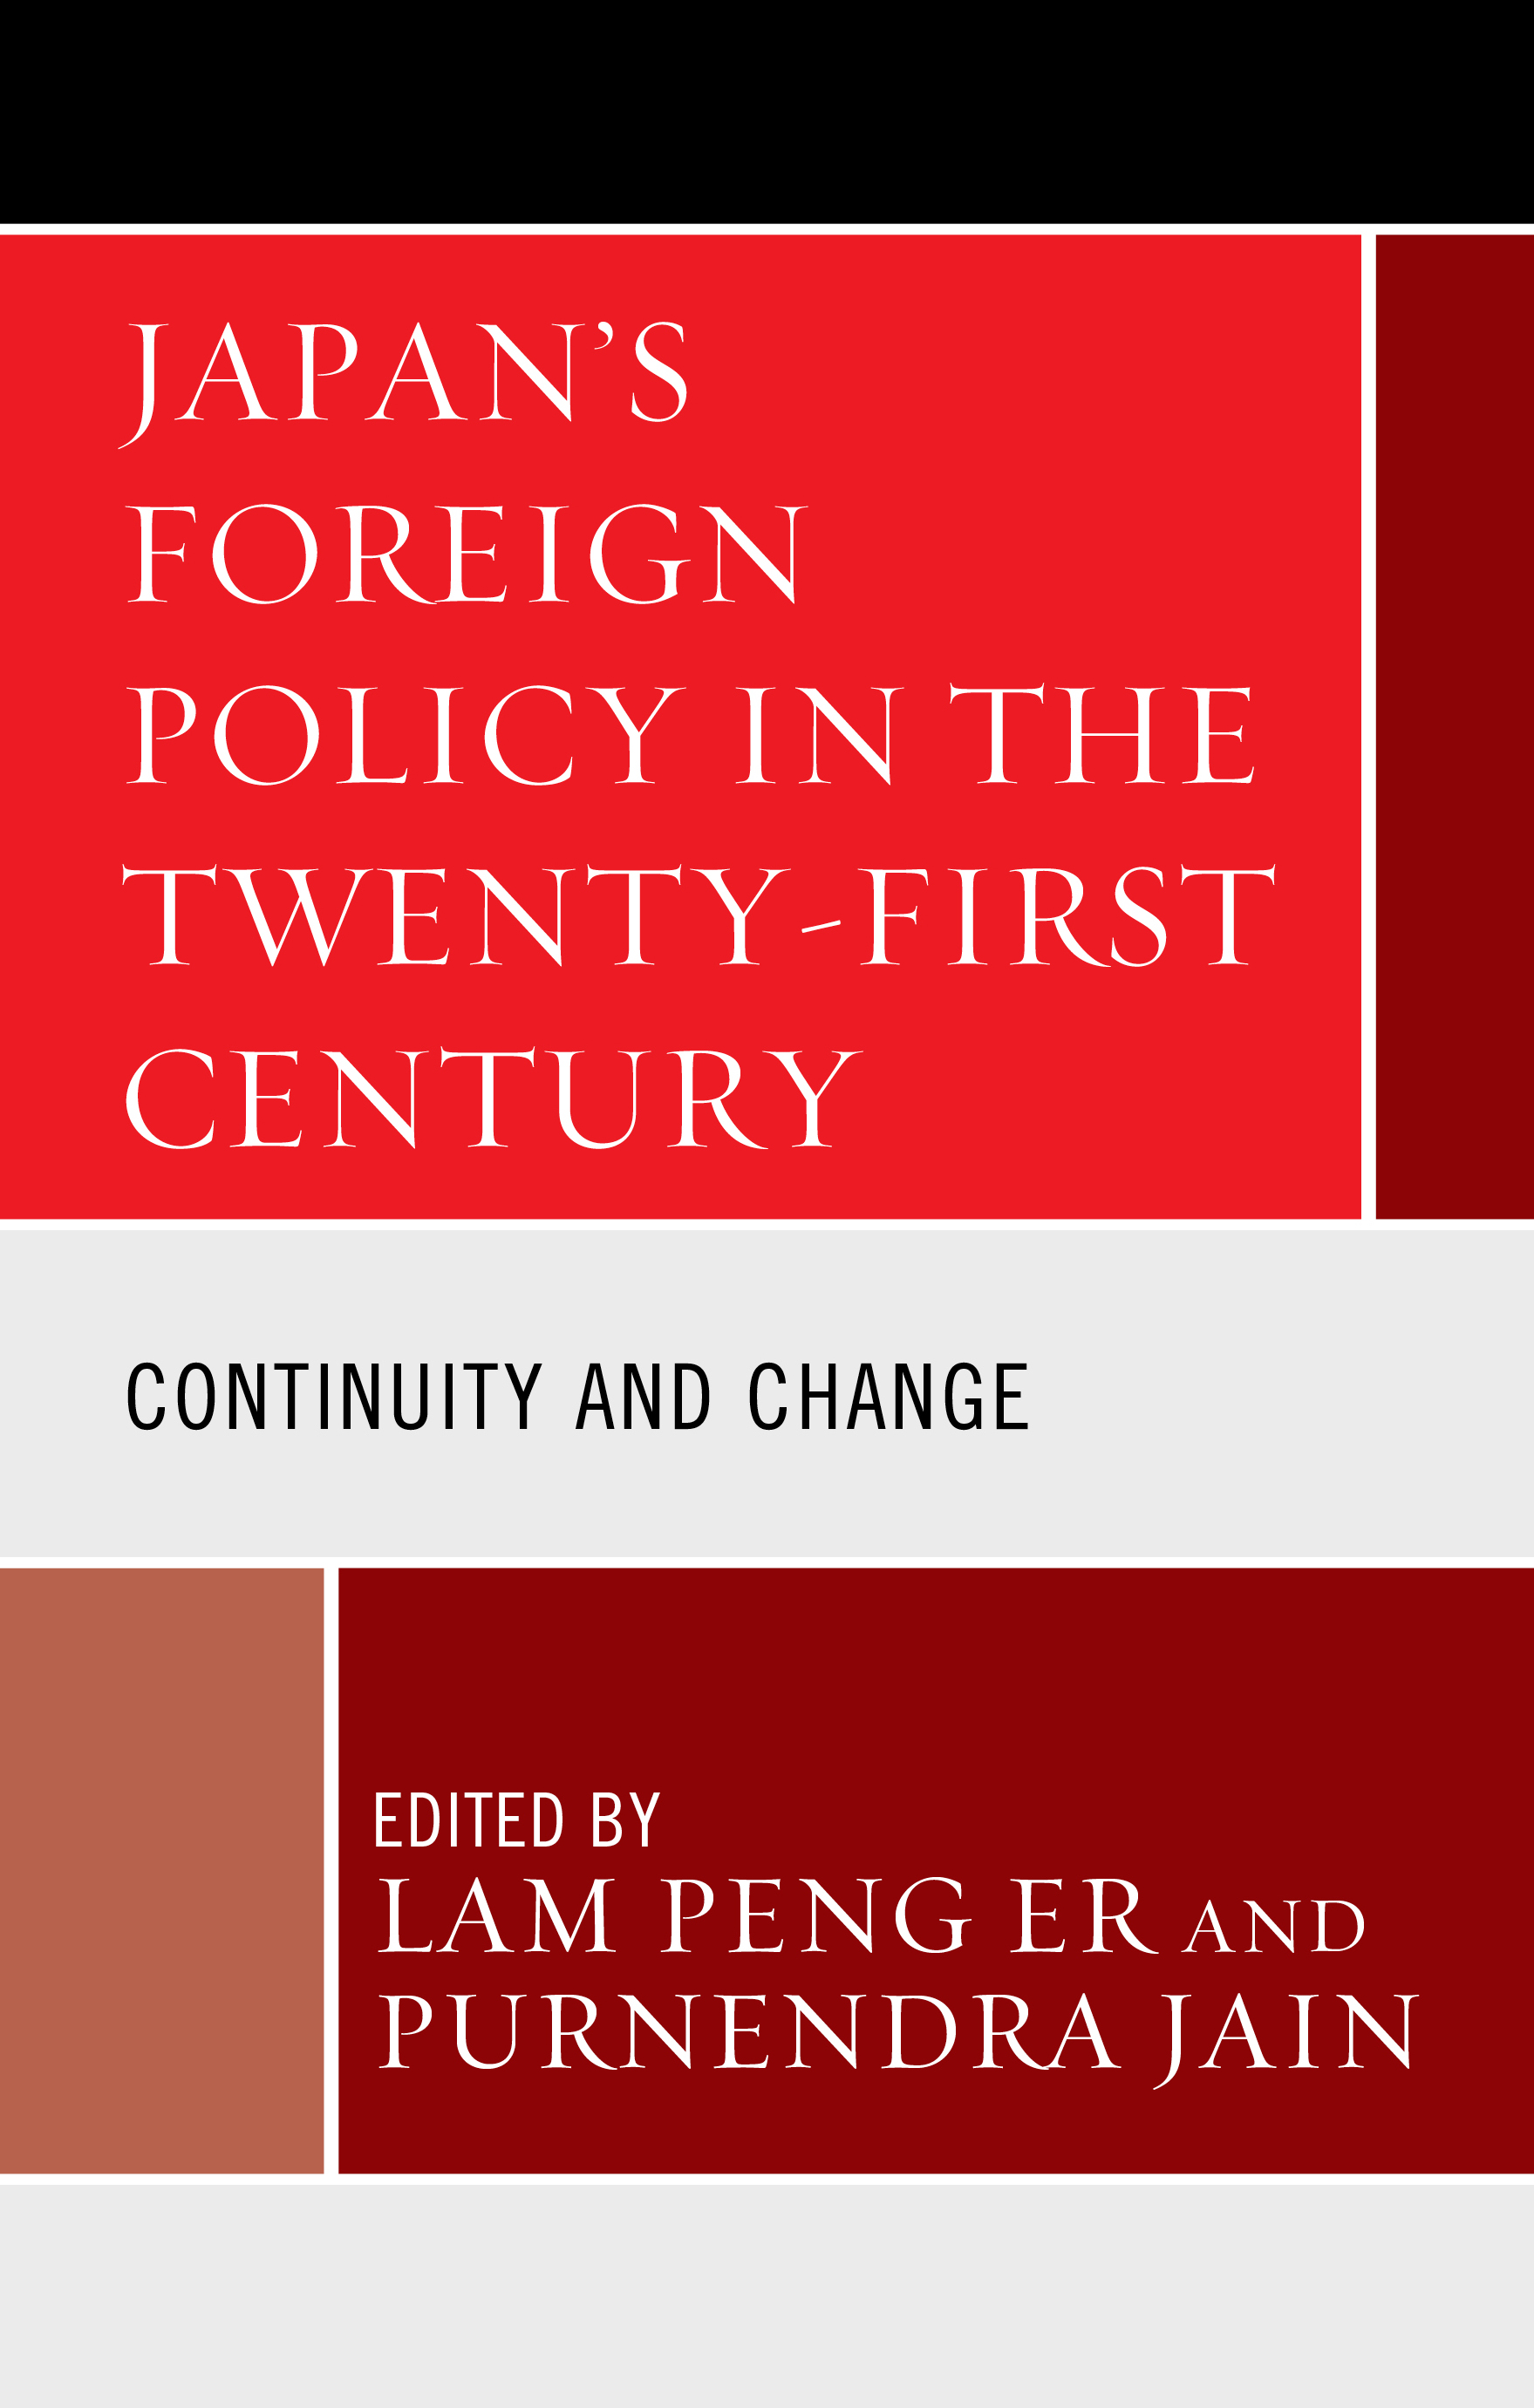 Japan's Foreign Policy in the Twenty-First Century: Continuity and Change